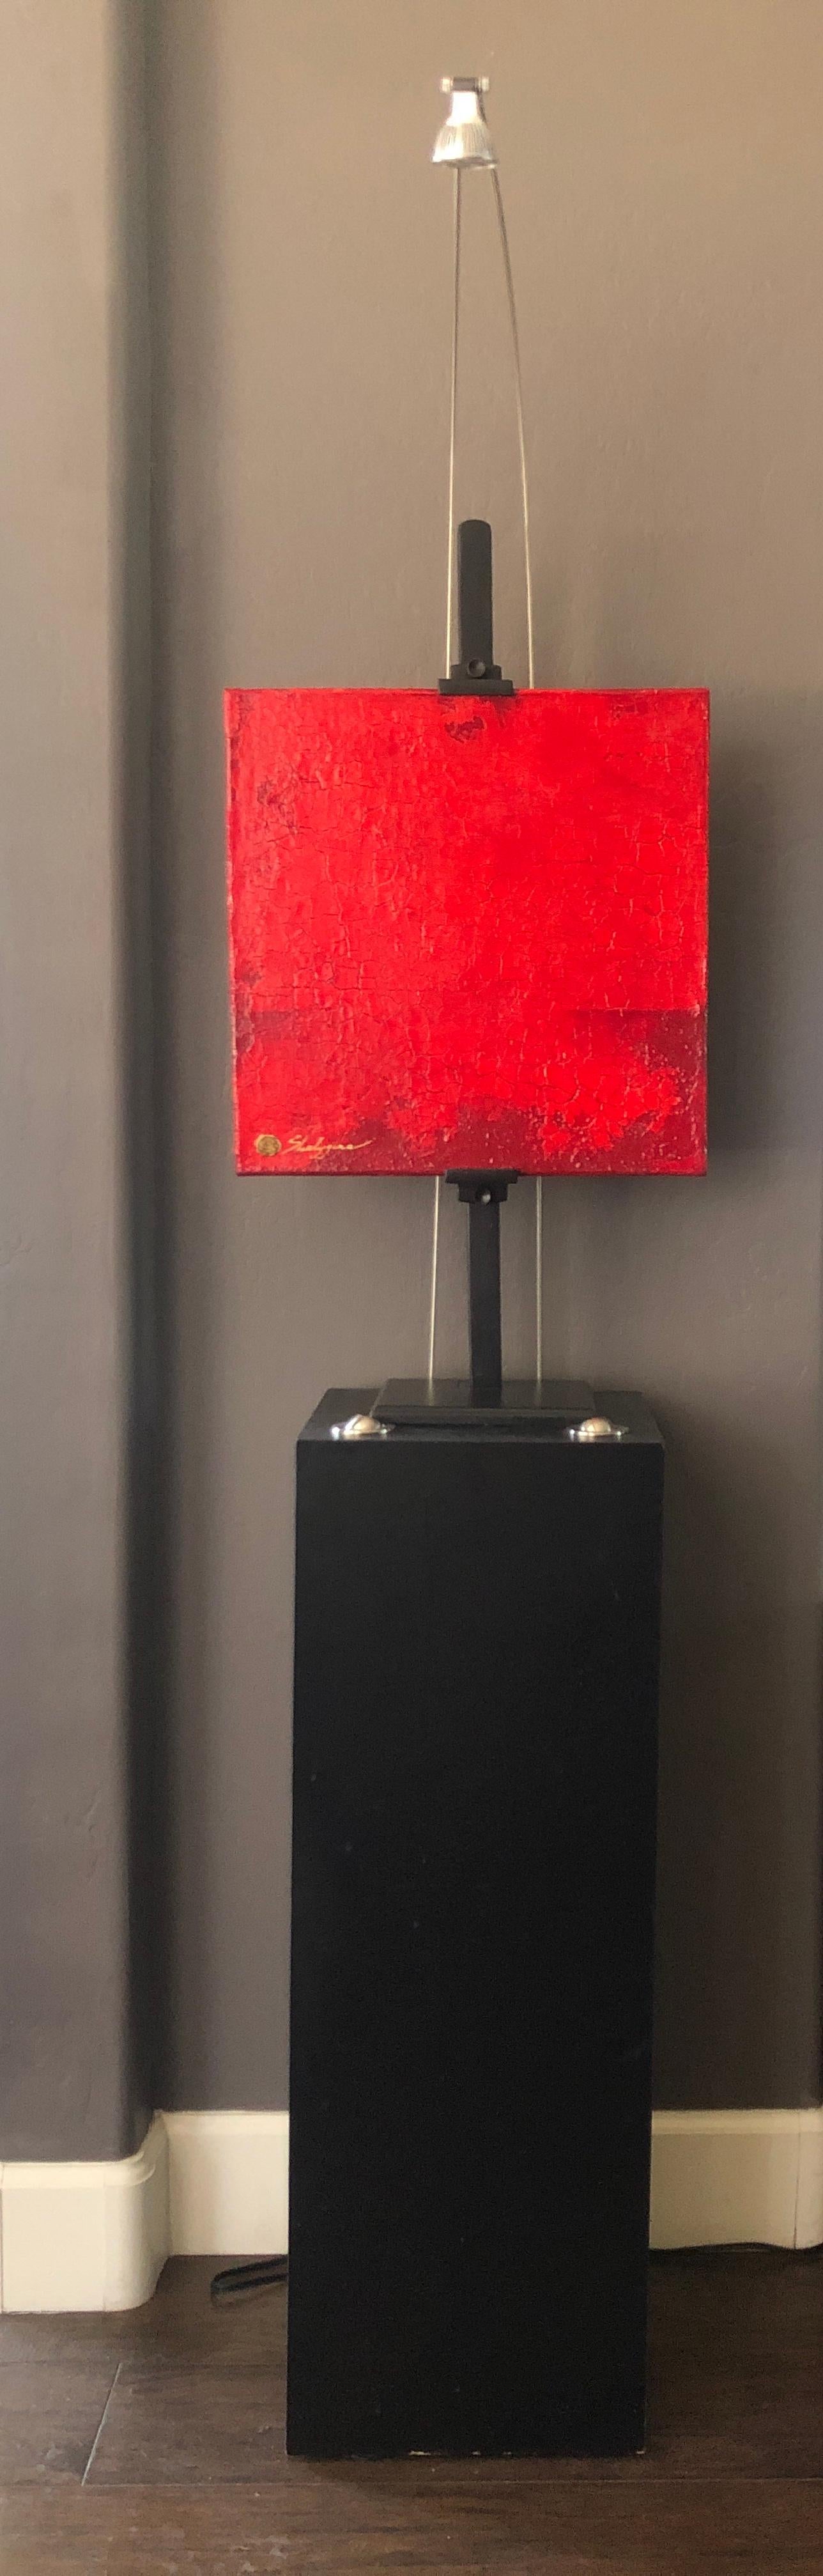 red monochromatic painting